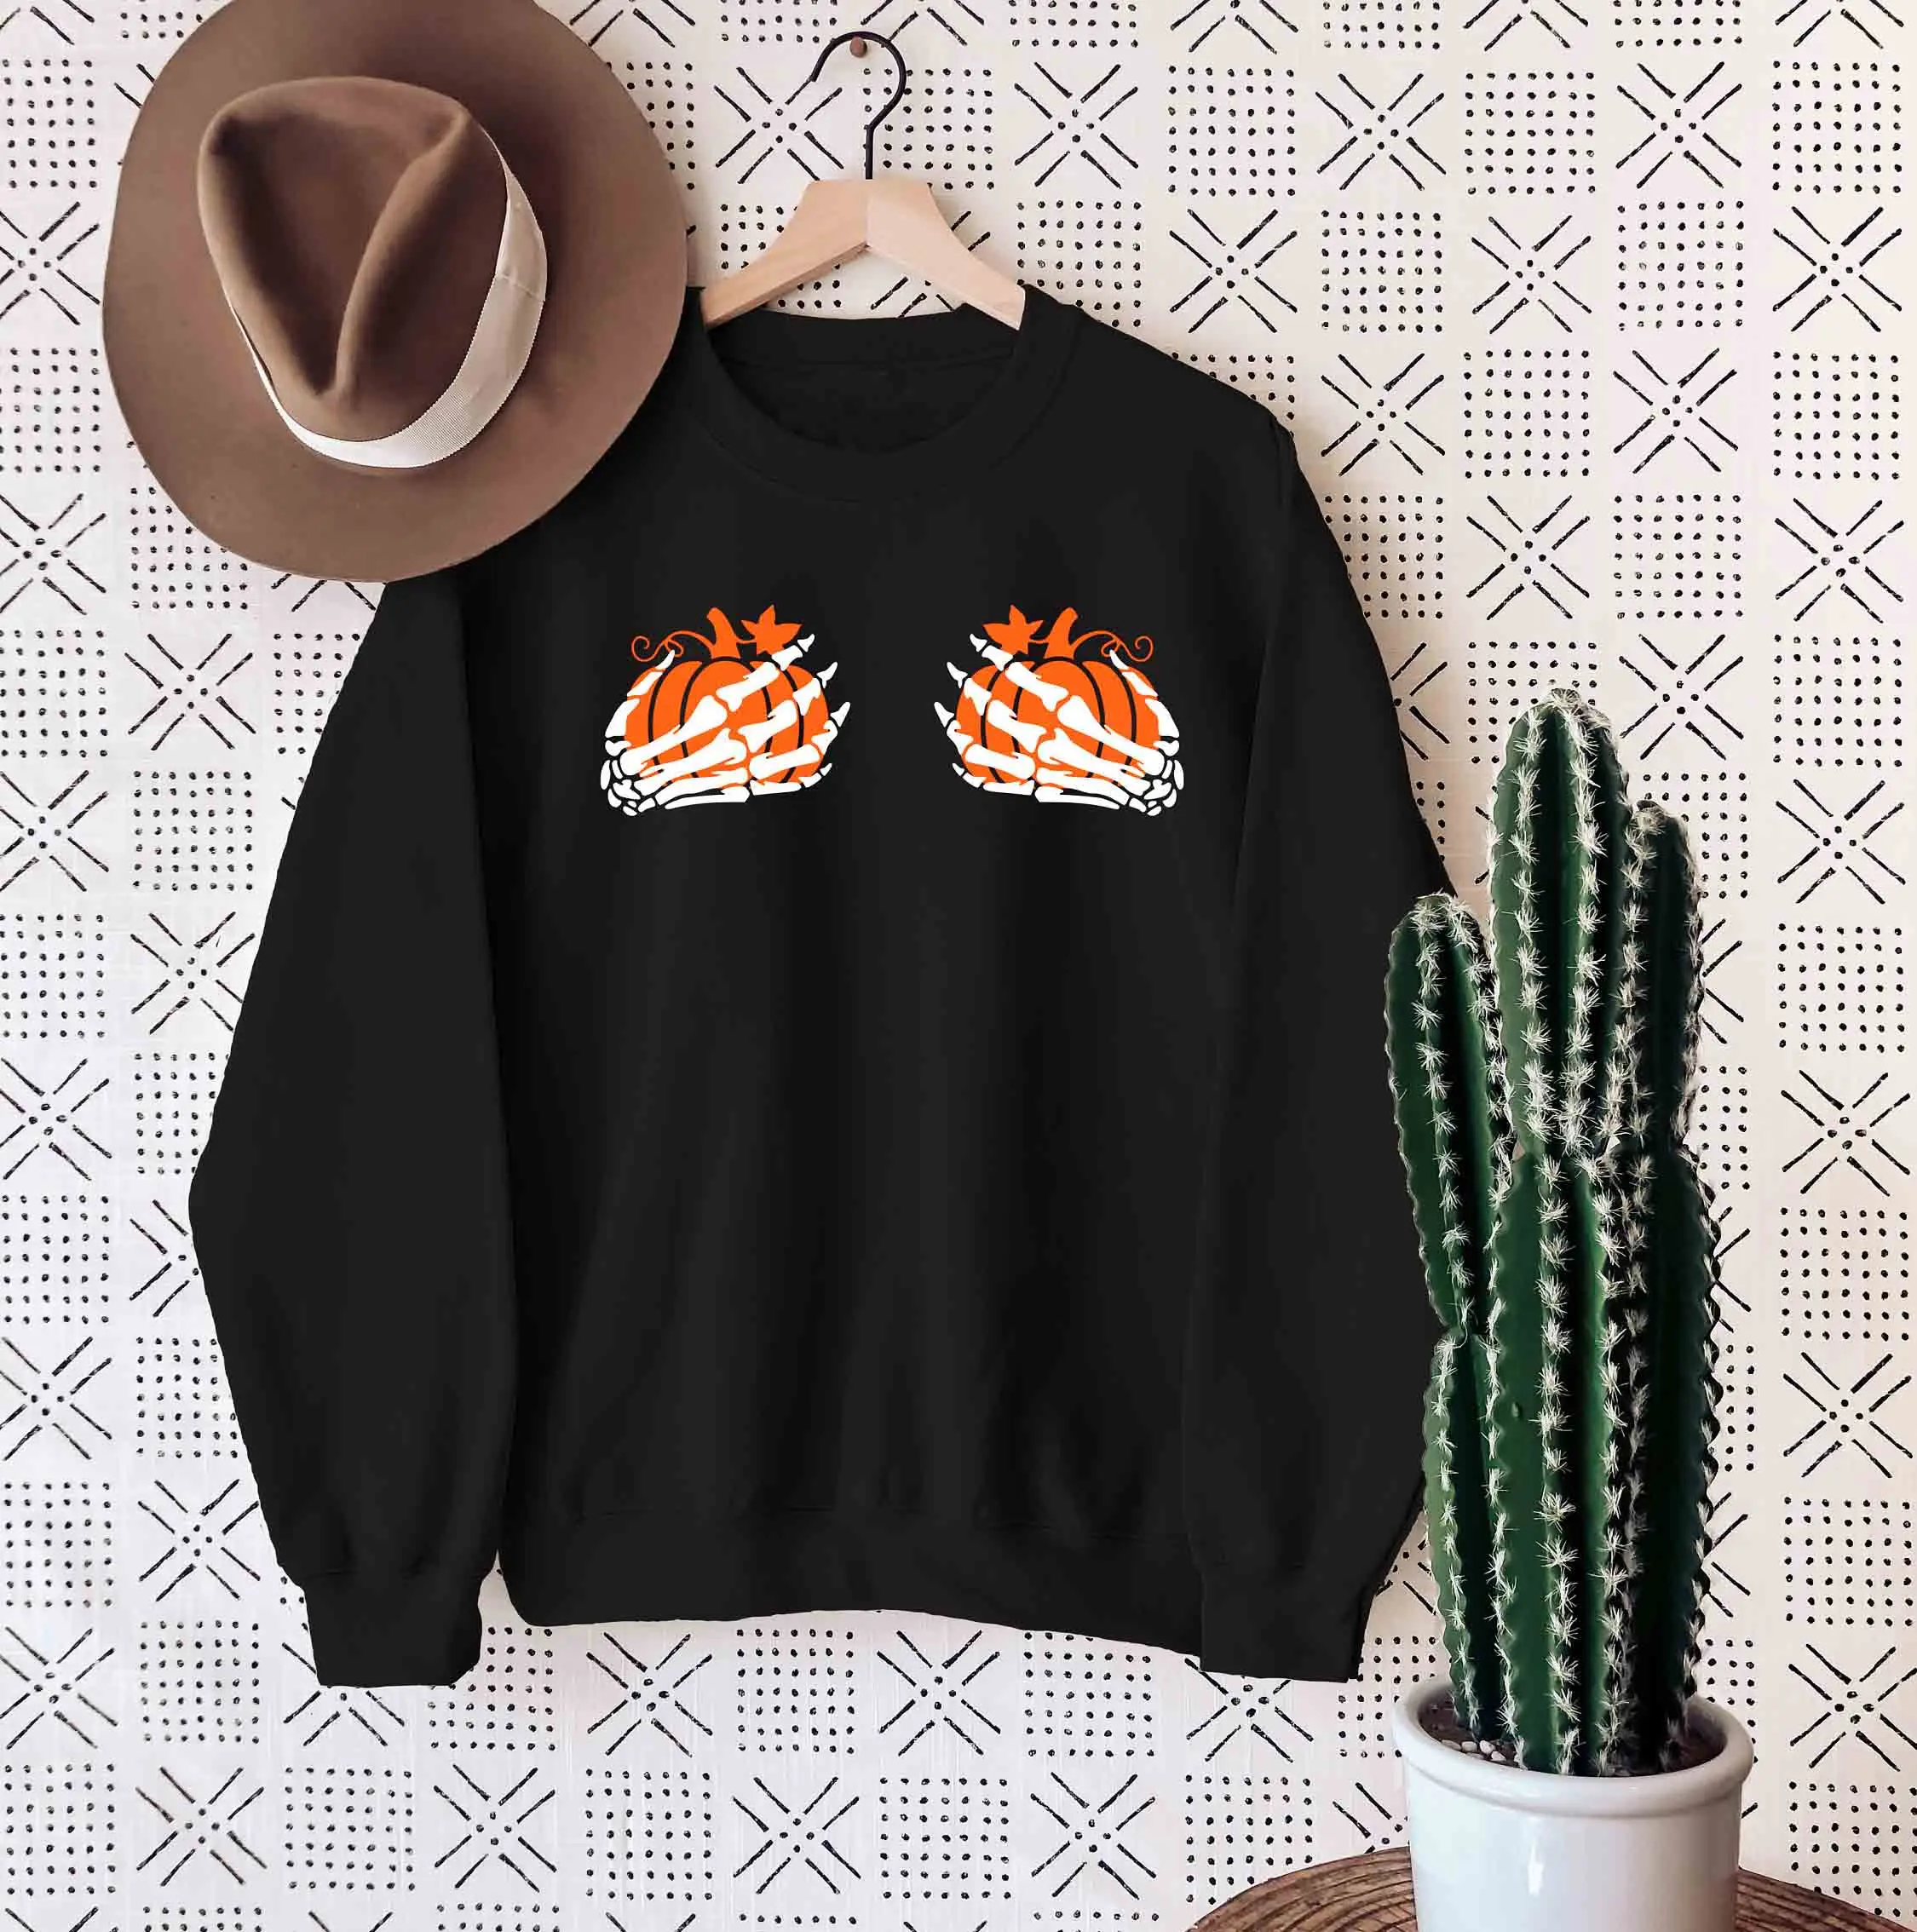 

Pumpkin Boobies Skeleton Hands Sweatshirt Funny Halloween thanksgiving pure cotton graphic funny pulllovers youngs party tops